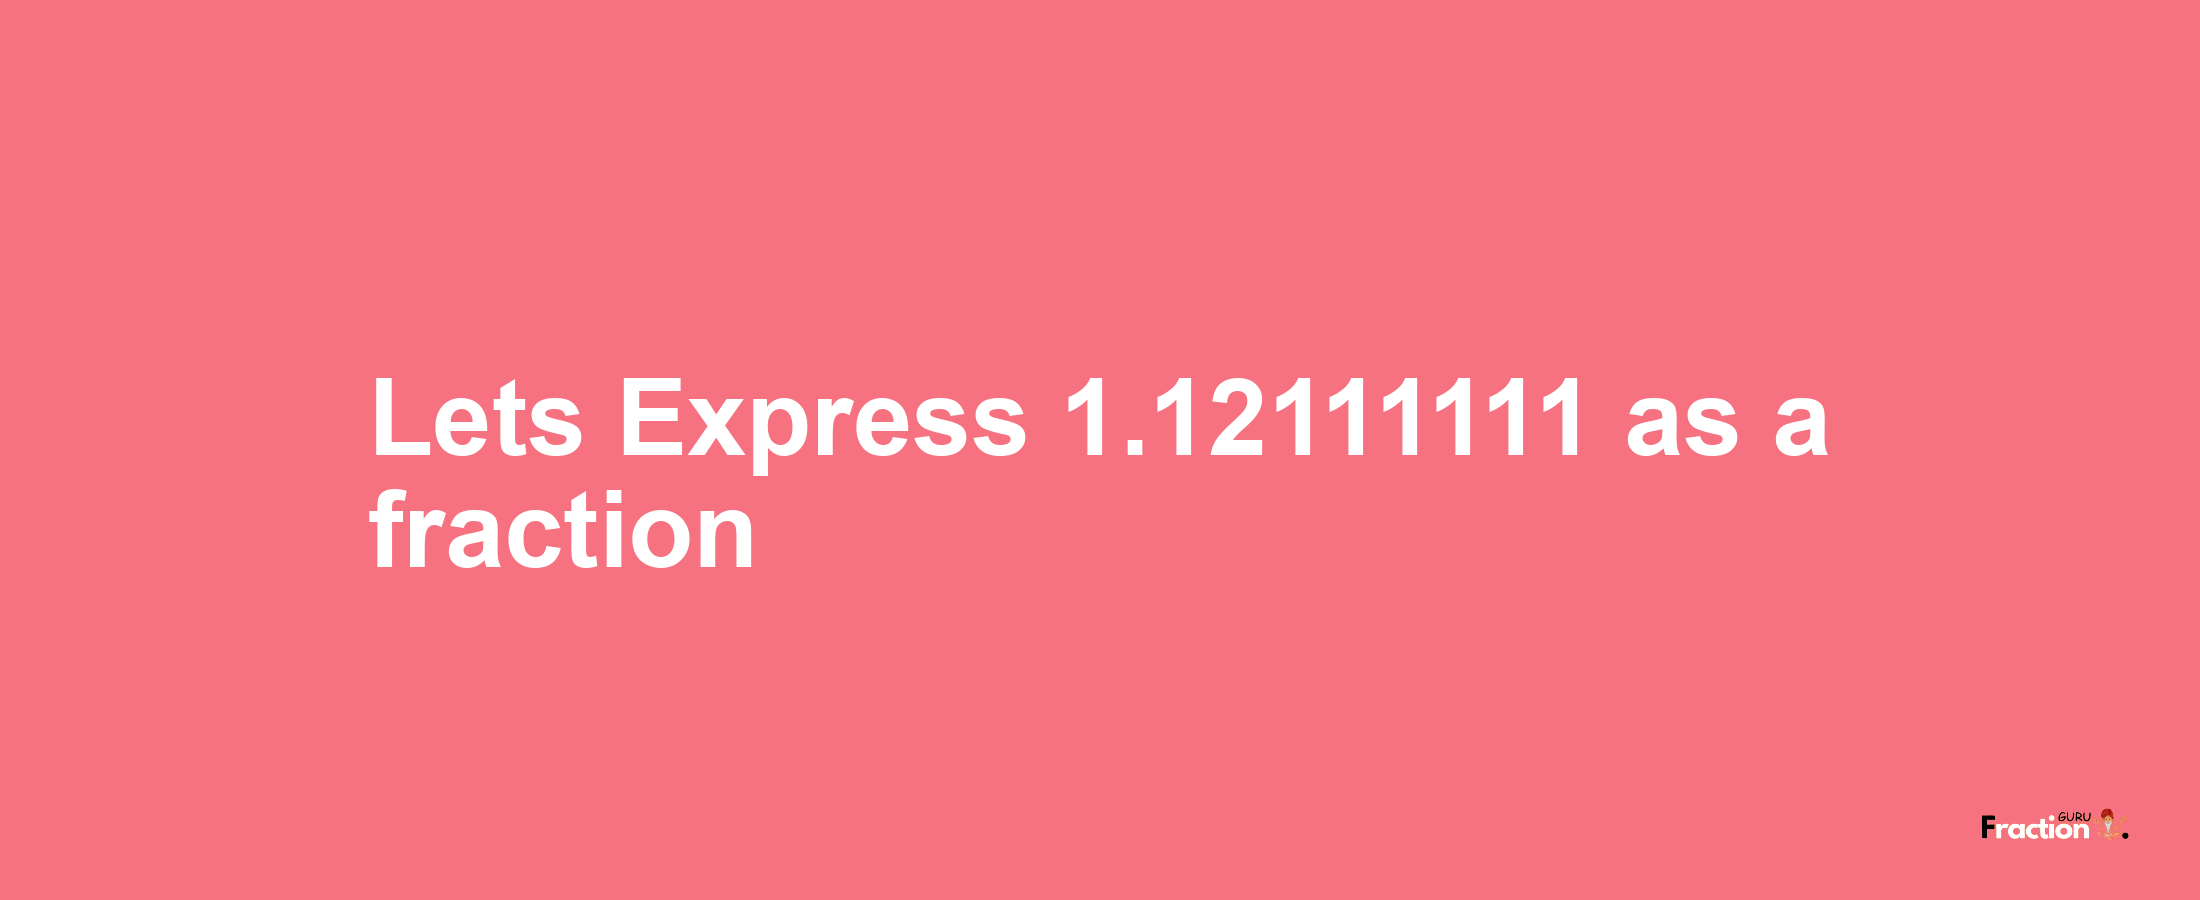 Lets Express 1.12111111 as afraction